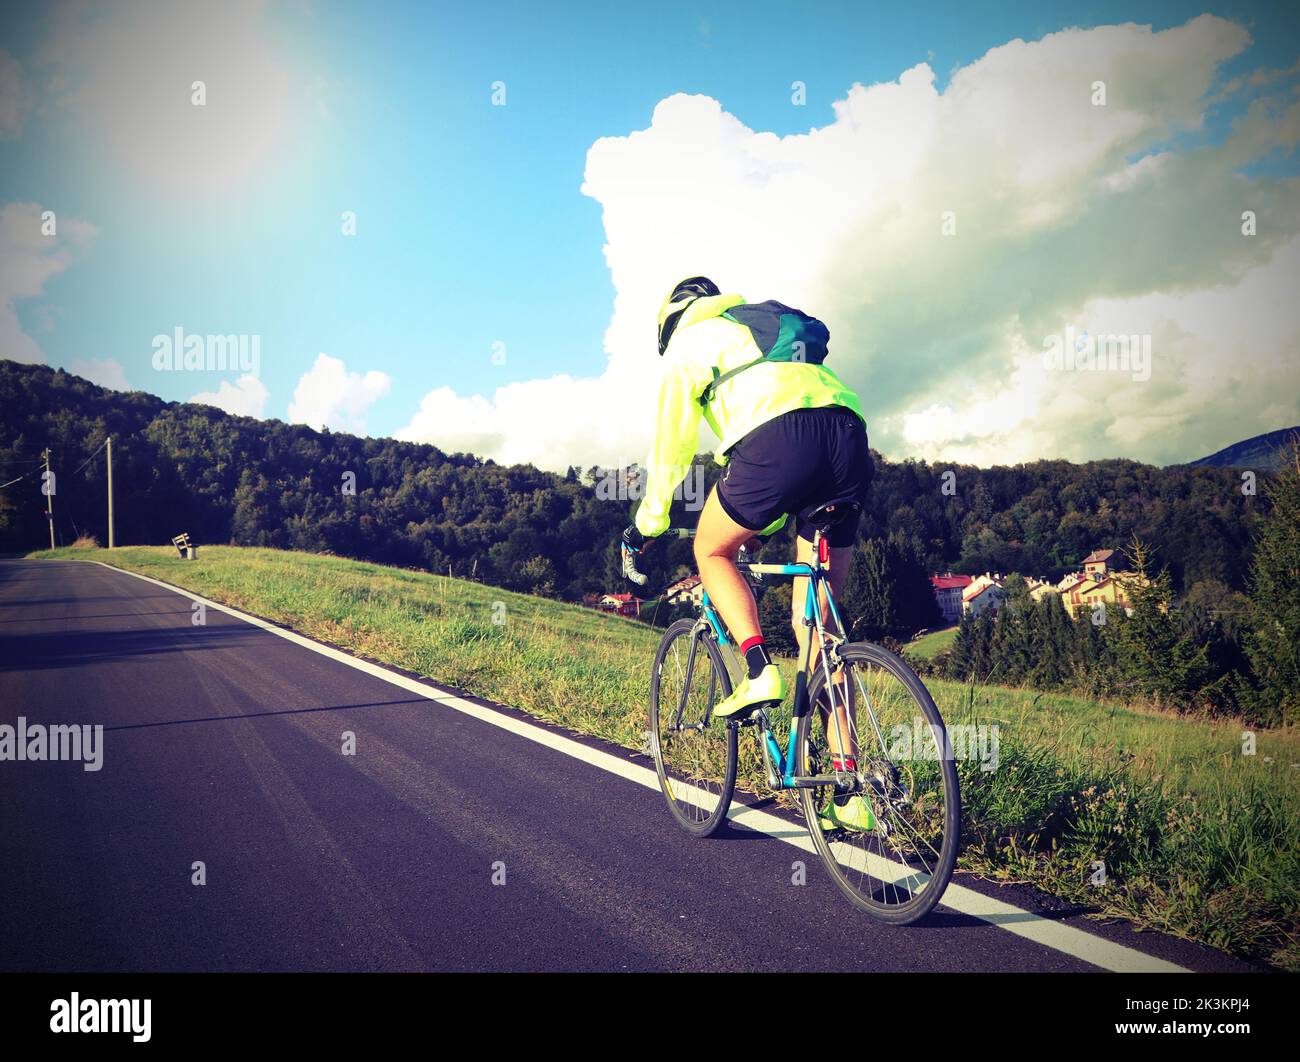 young cyclist with racing bicycle and waterproof jacket on mountain road rides fast seen from behind Stock Photo